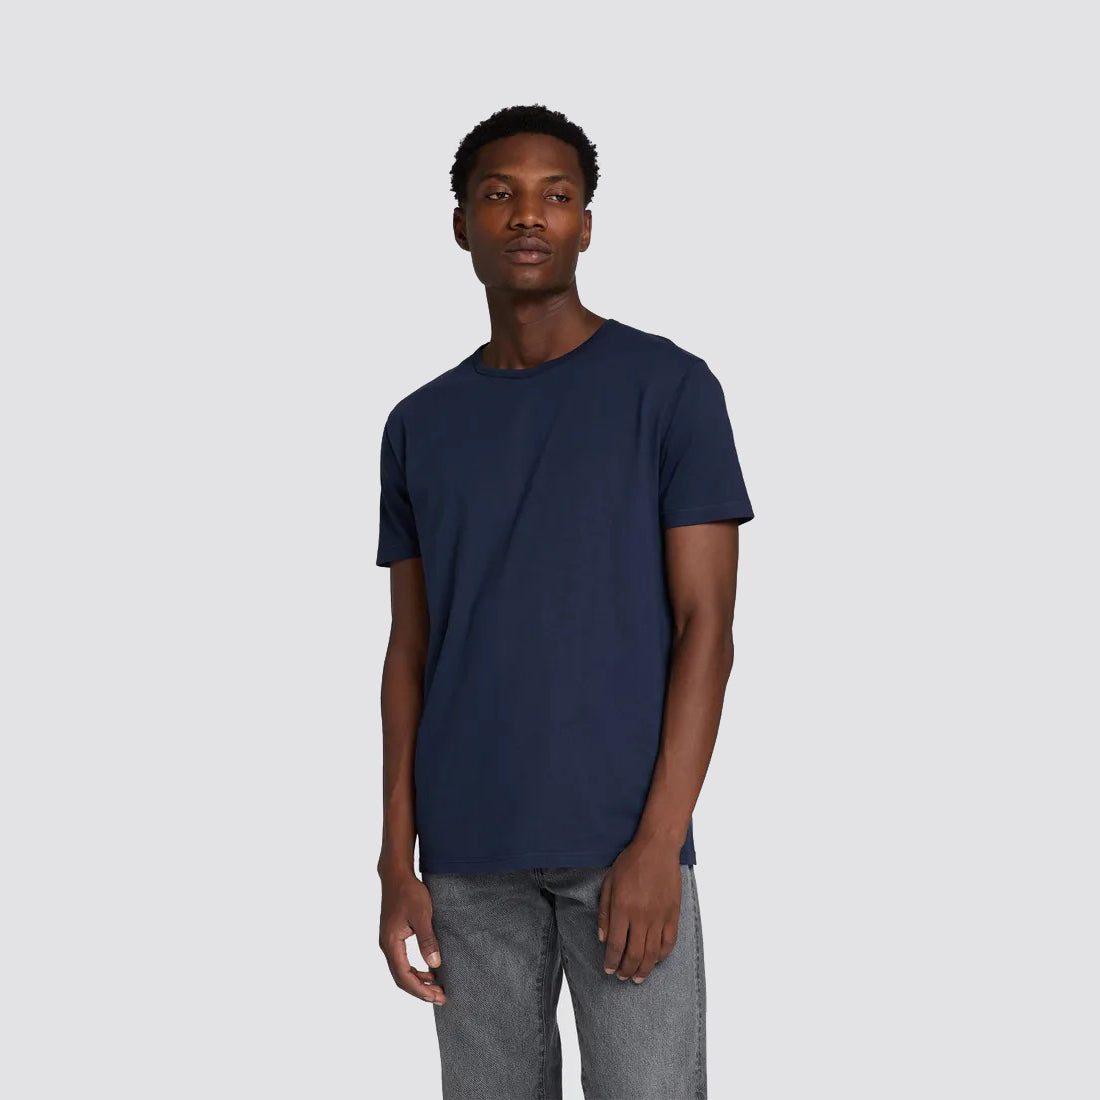 Buy online Mens Designer T-shirts from Norse Projects, Alex Mill and more